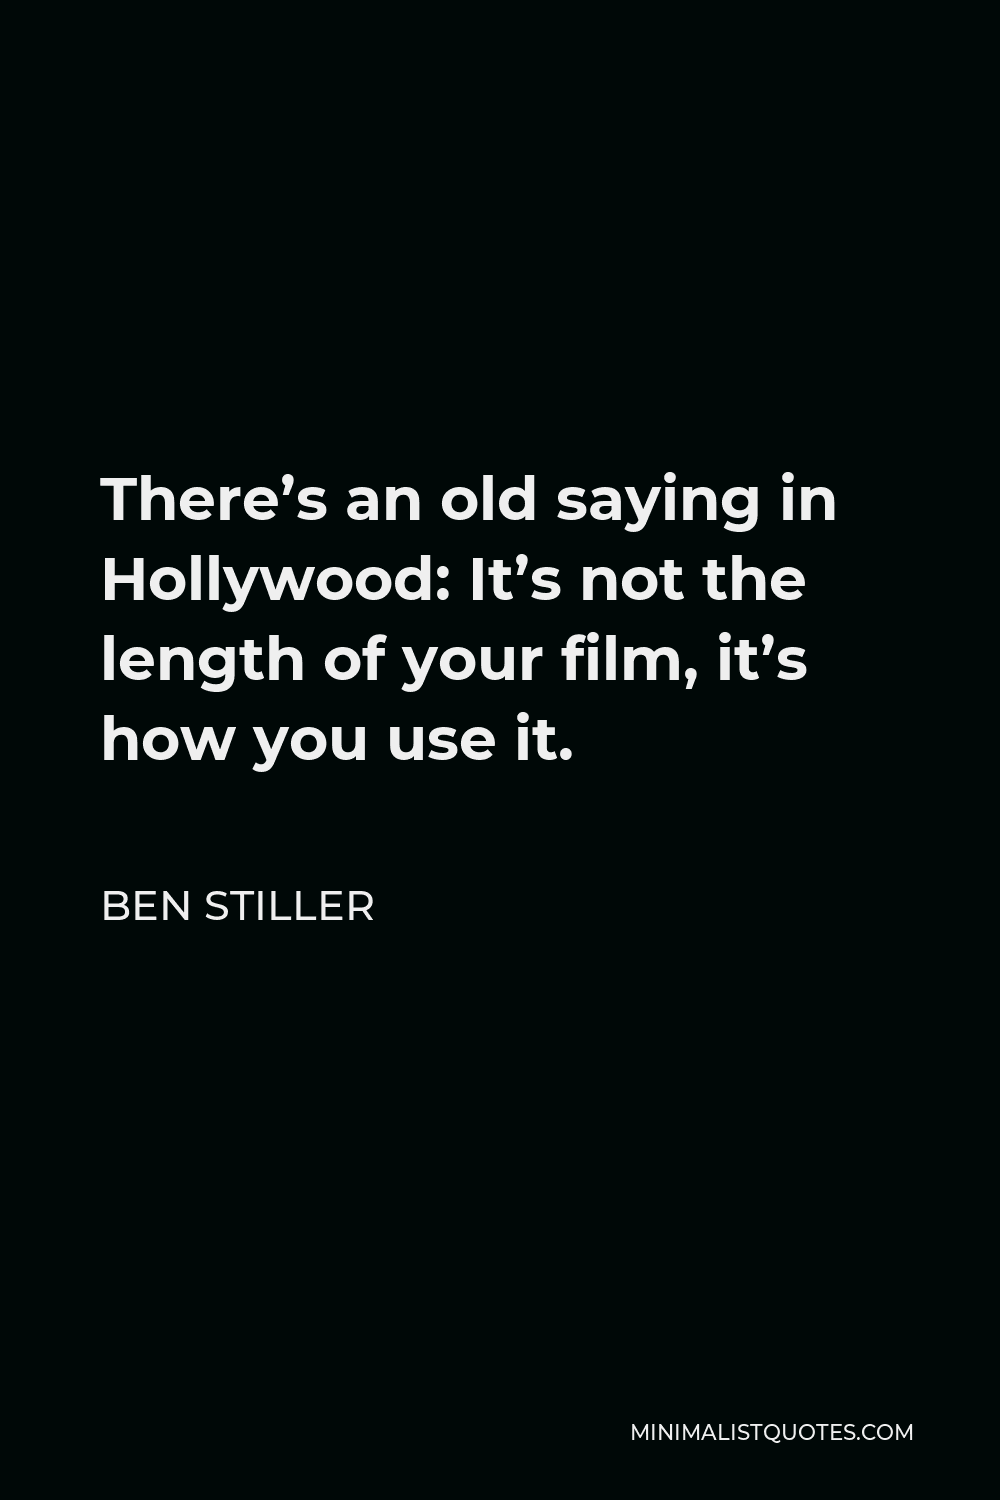 Ben Stiller Quote - There’s an old saying in Hollywood: It’s not the length of your film, it’s how you use it.